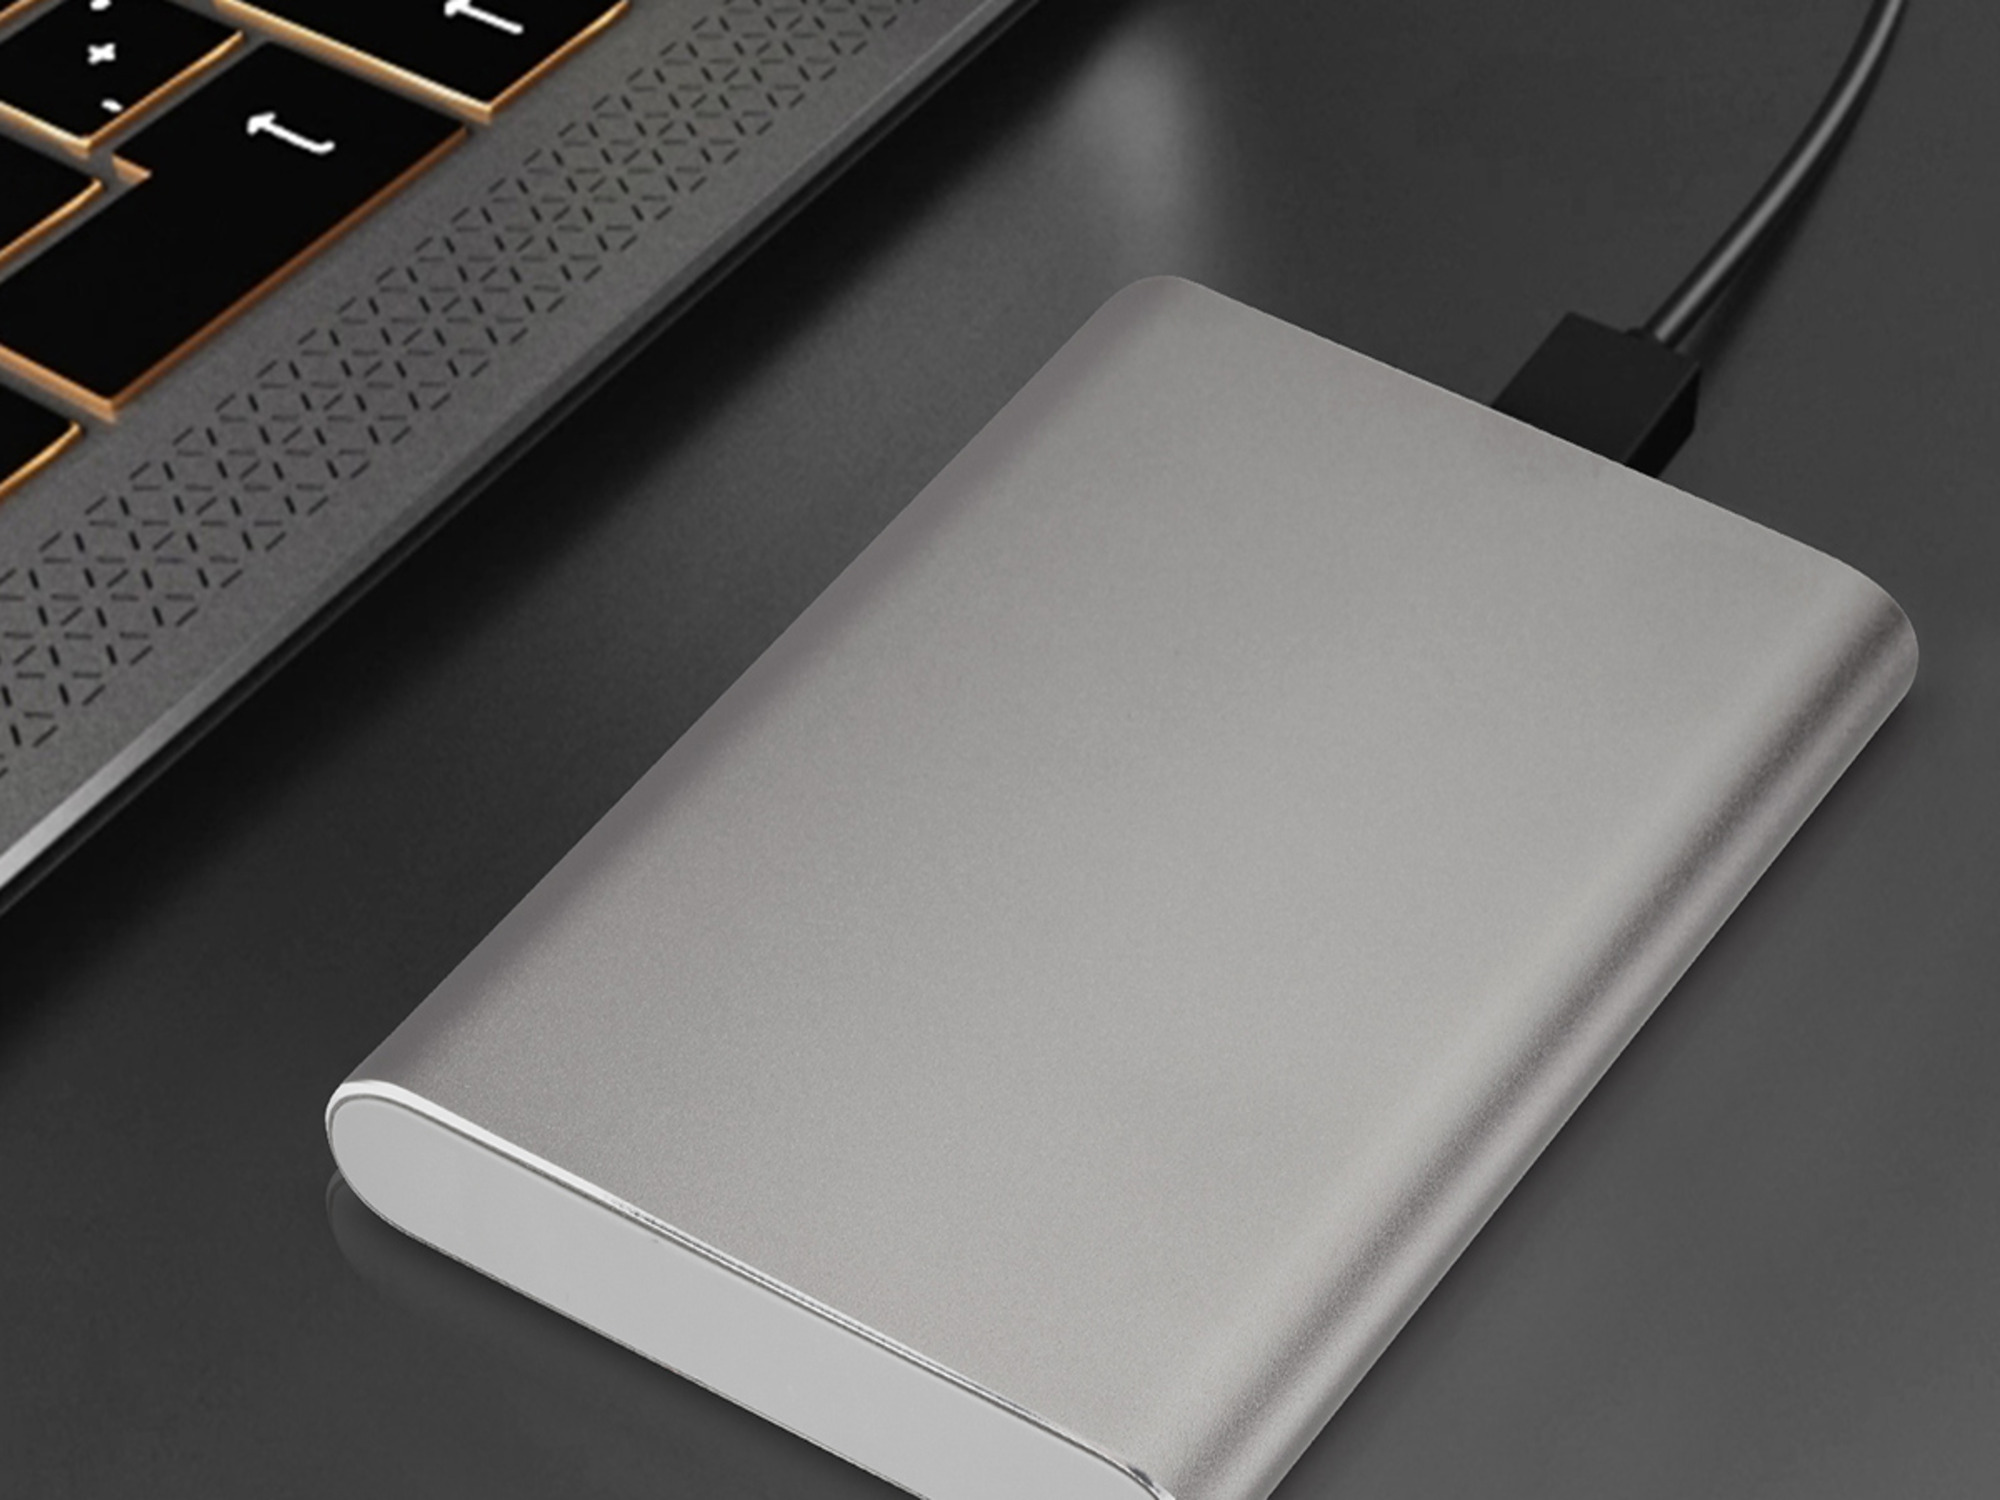 Maximize your device’s storage with this $33 500GB hard drive